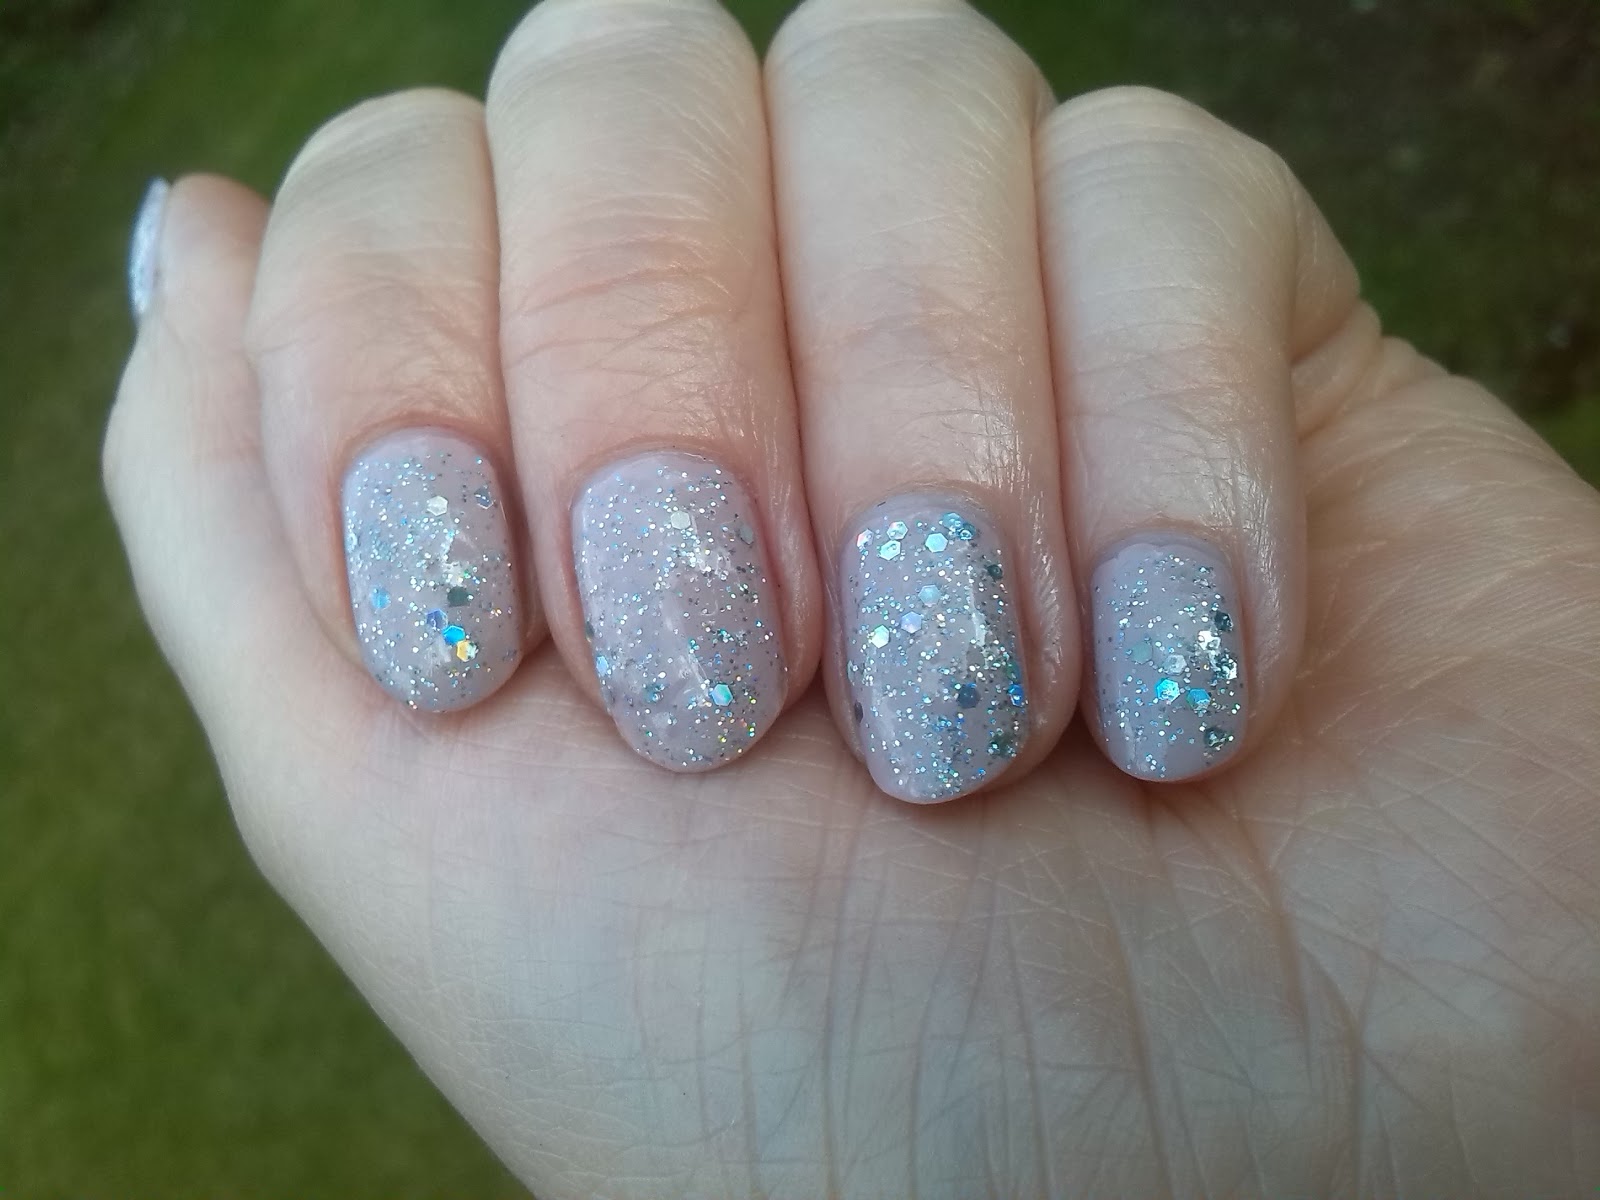 Nails Inc George Street and OPI Servin' Up Sparkle